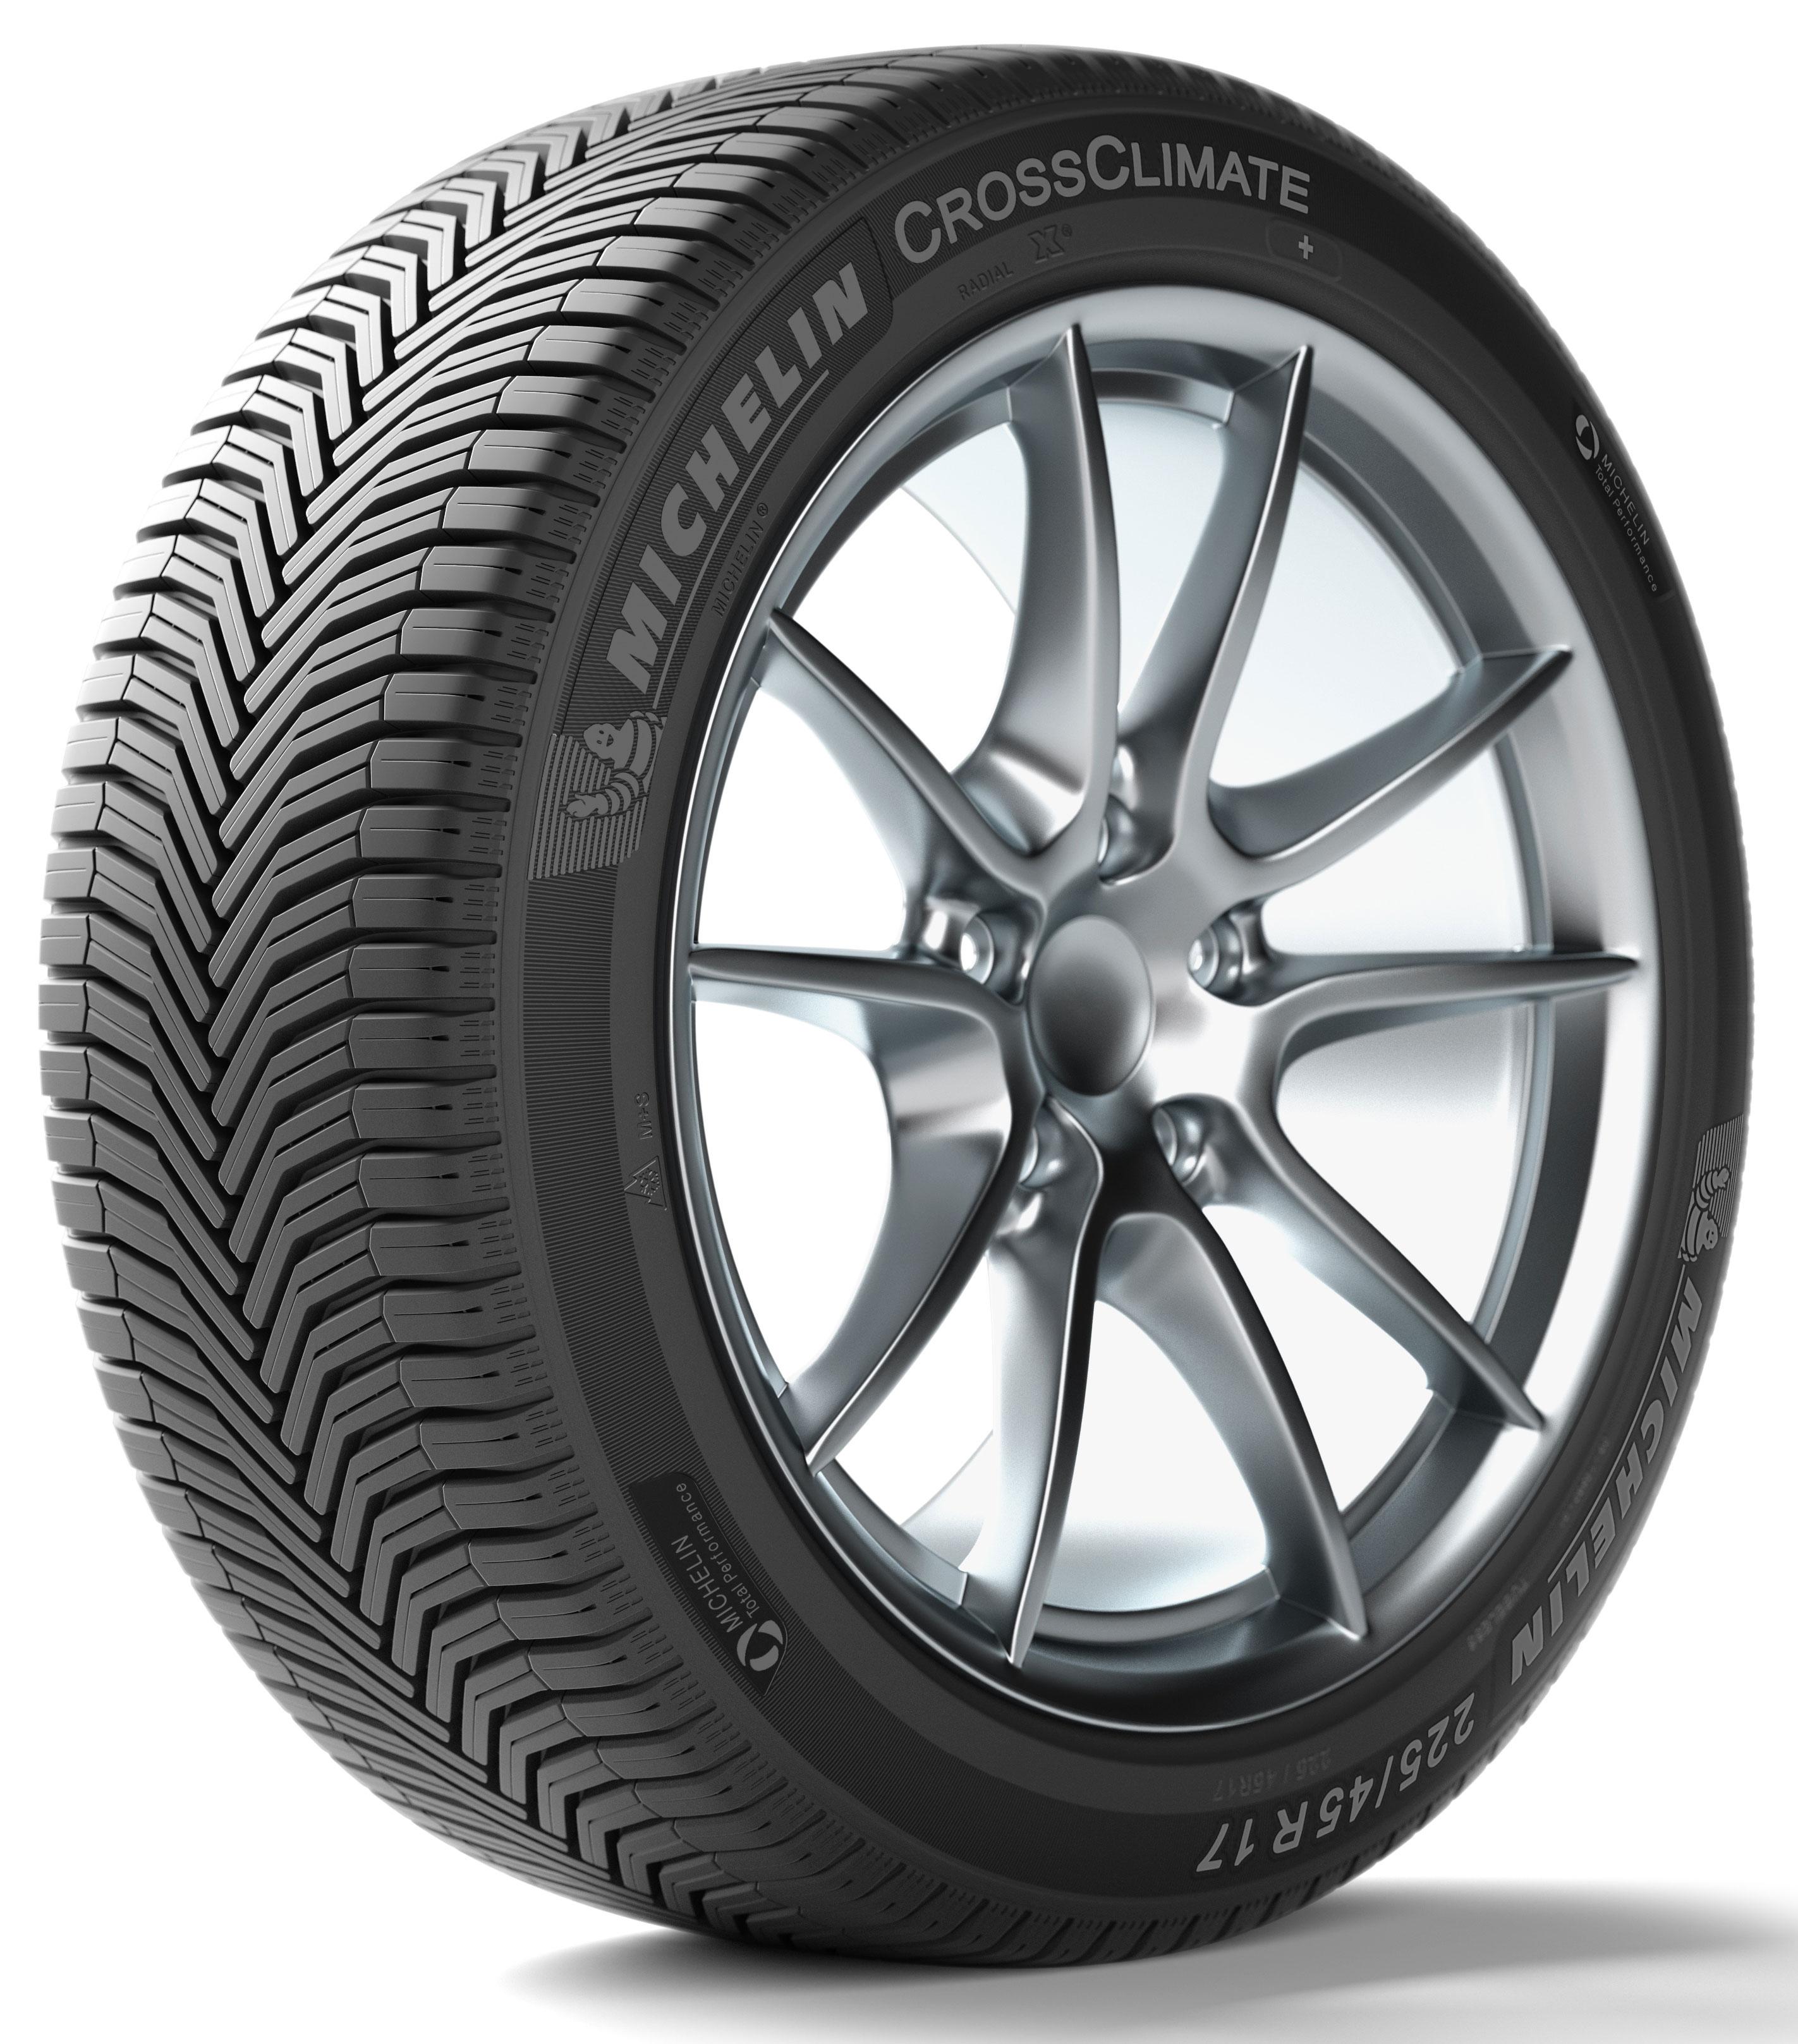 Anvelope all seasons MICHELIN CrossClimate Suv M+S XL 235/60 R17 106V